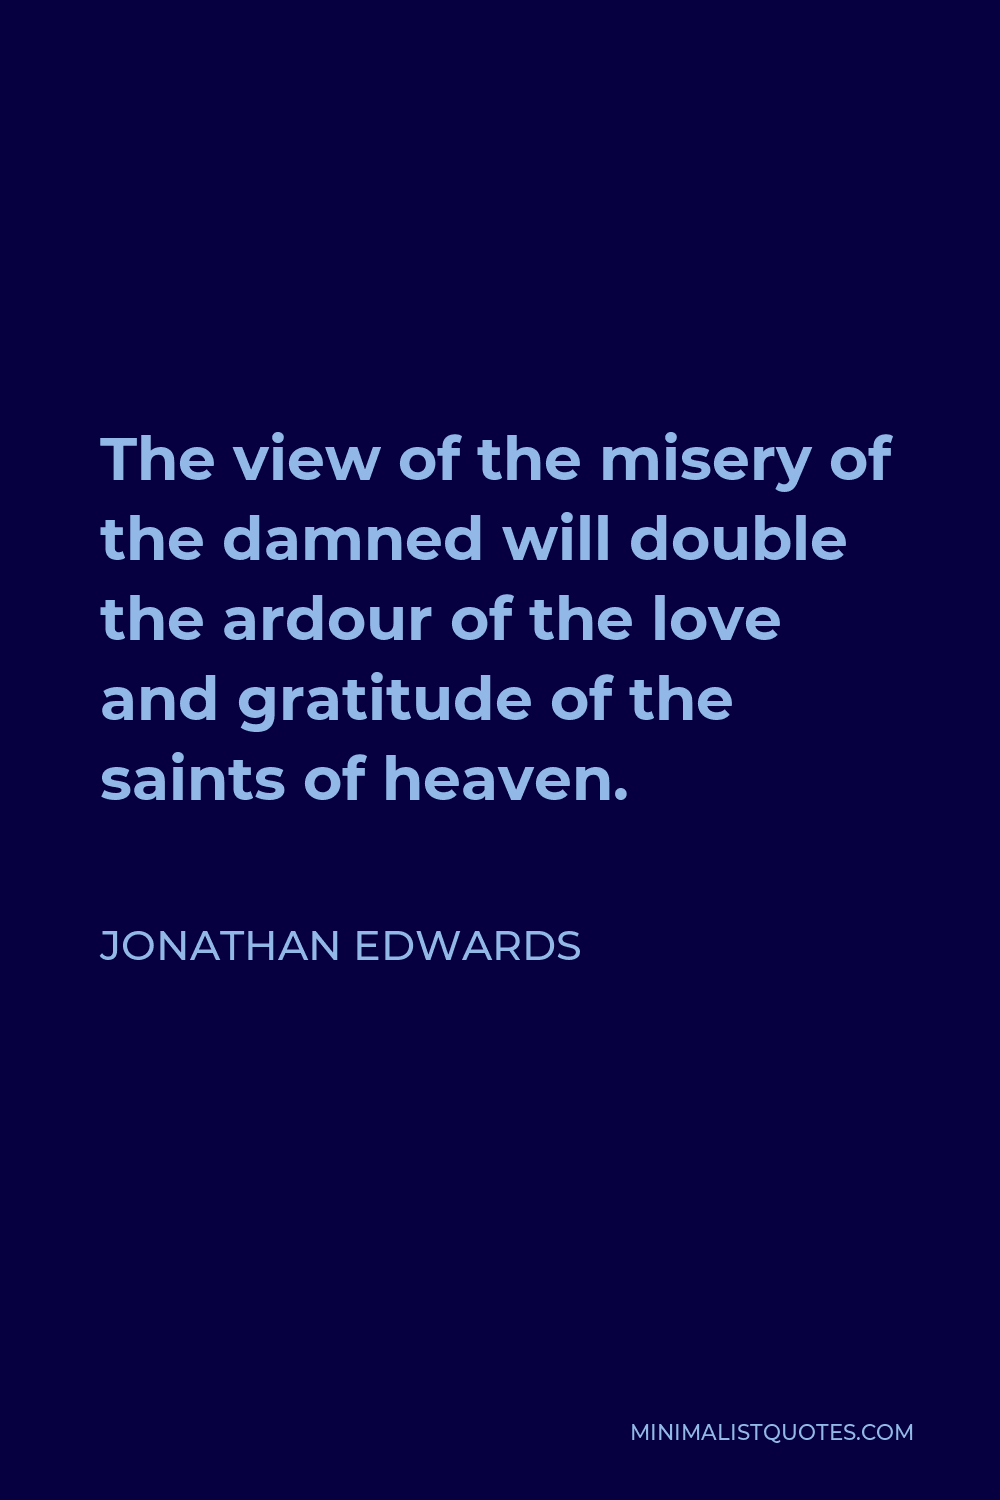 Jonathan Edwards Quote - The view of the misery of the damned will double the ardour of the love and gratitude of the saints of heaven.